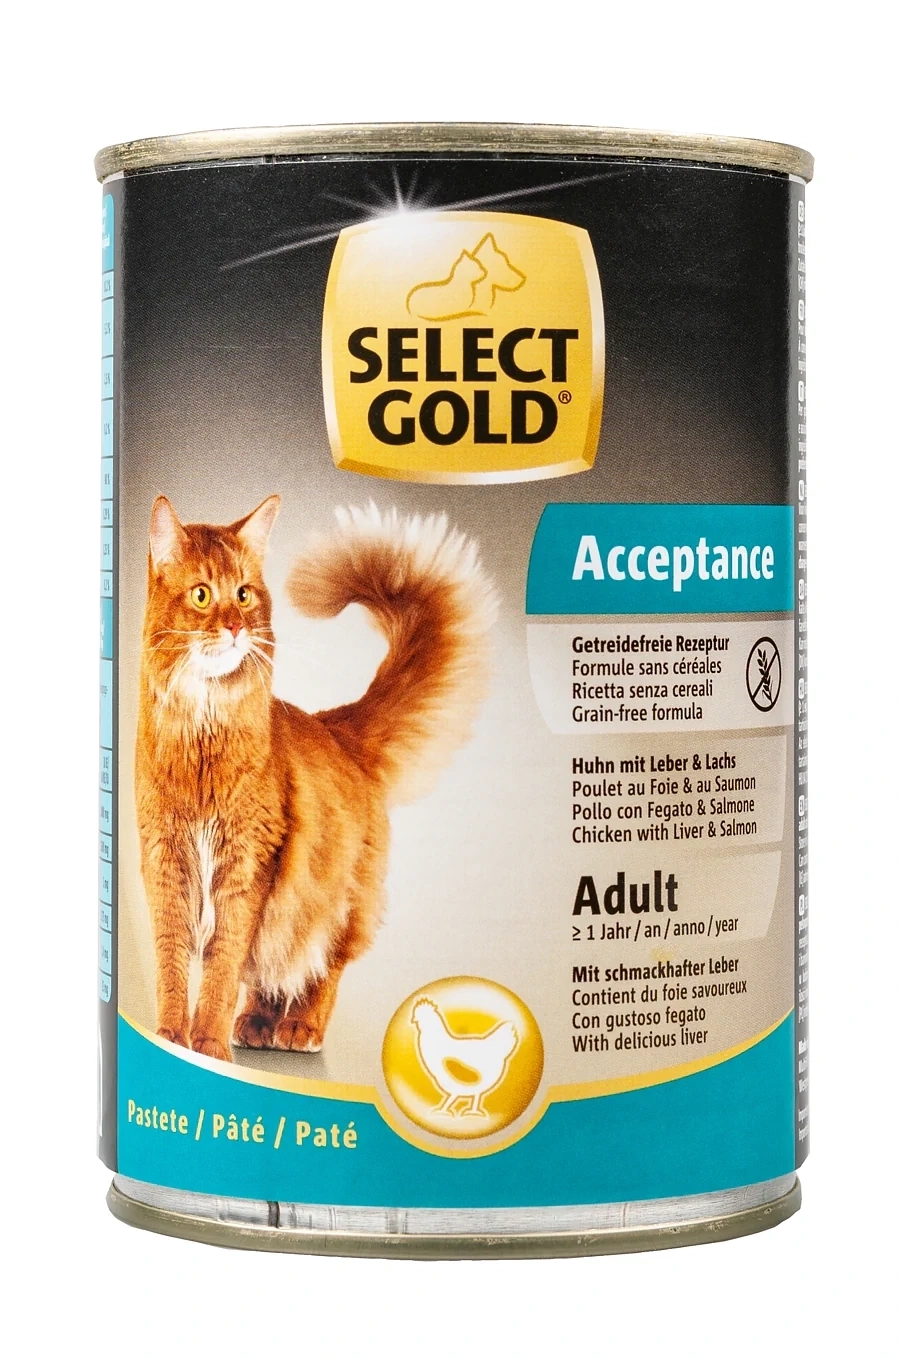 Fressnapf Select Gold Acceptance Pastete Huhn mit Leber & Lachs Adult